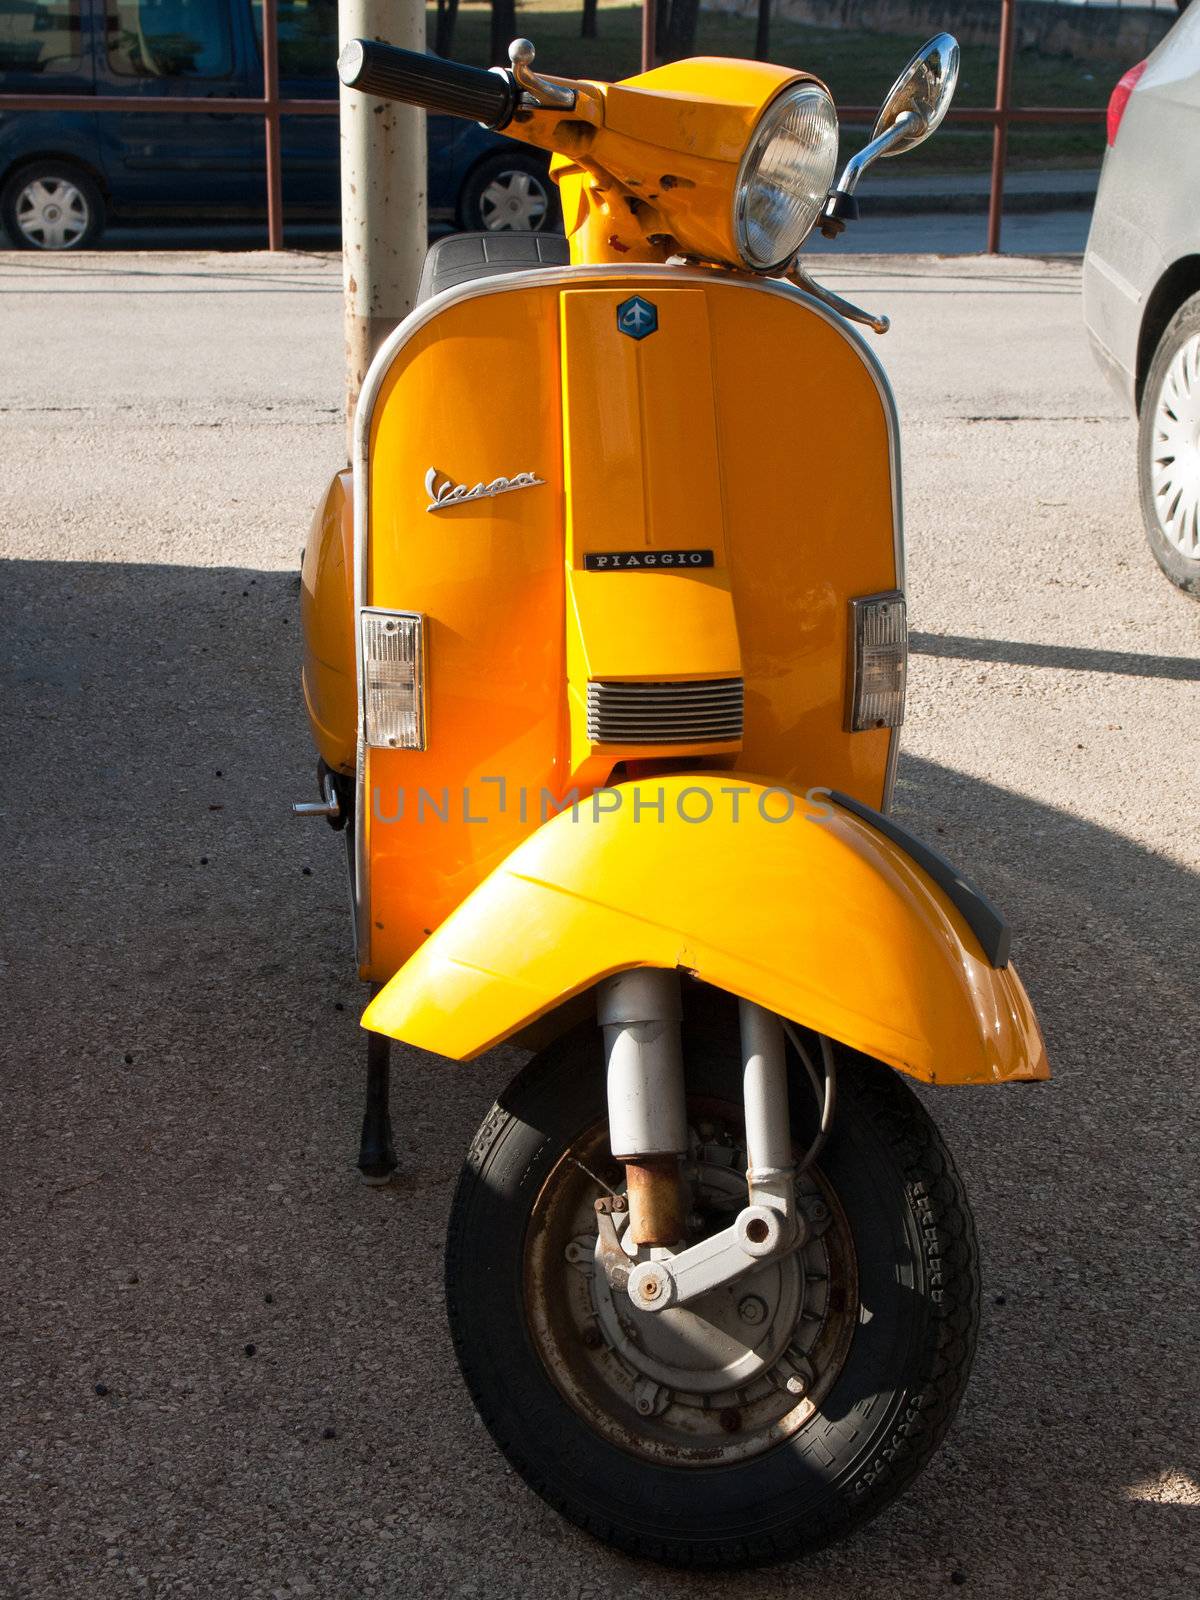 yellow vespa parked on the street